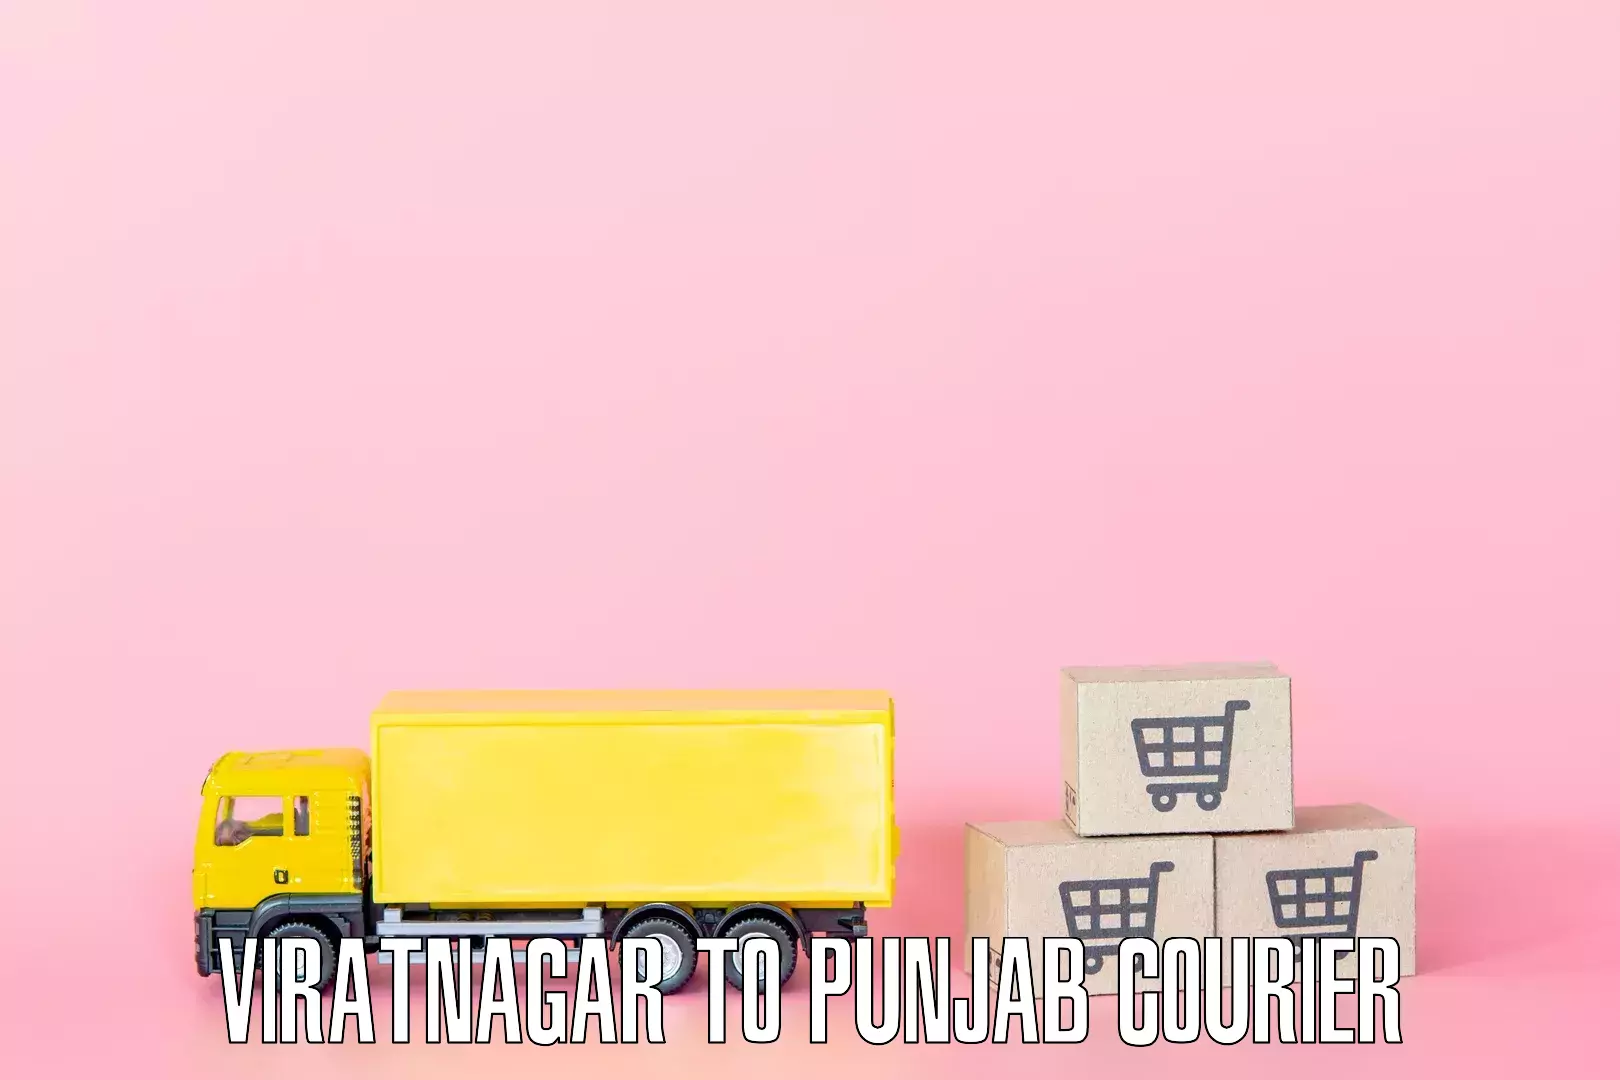 Professional movers Viratnagar to Sultanpur Lodhi